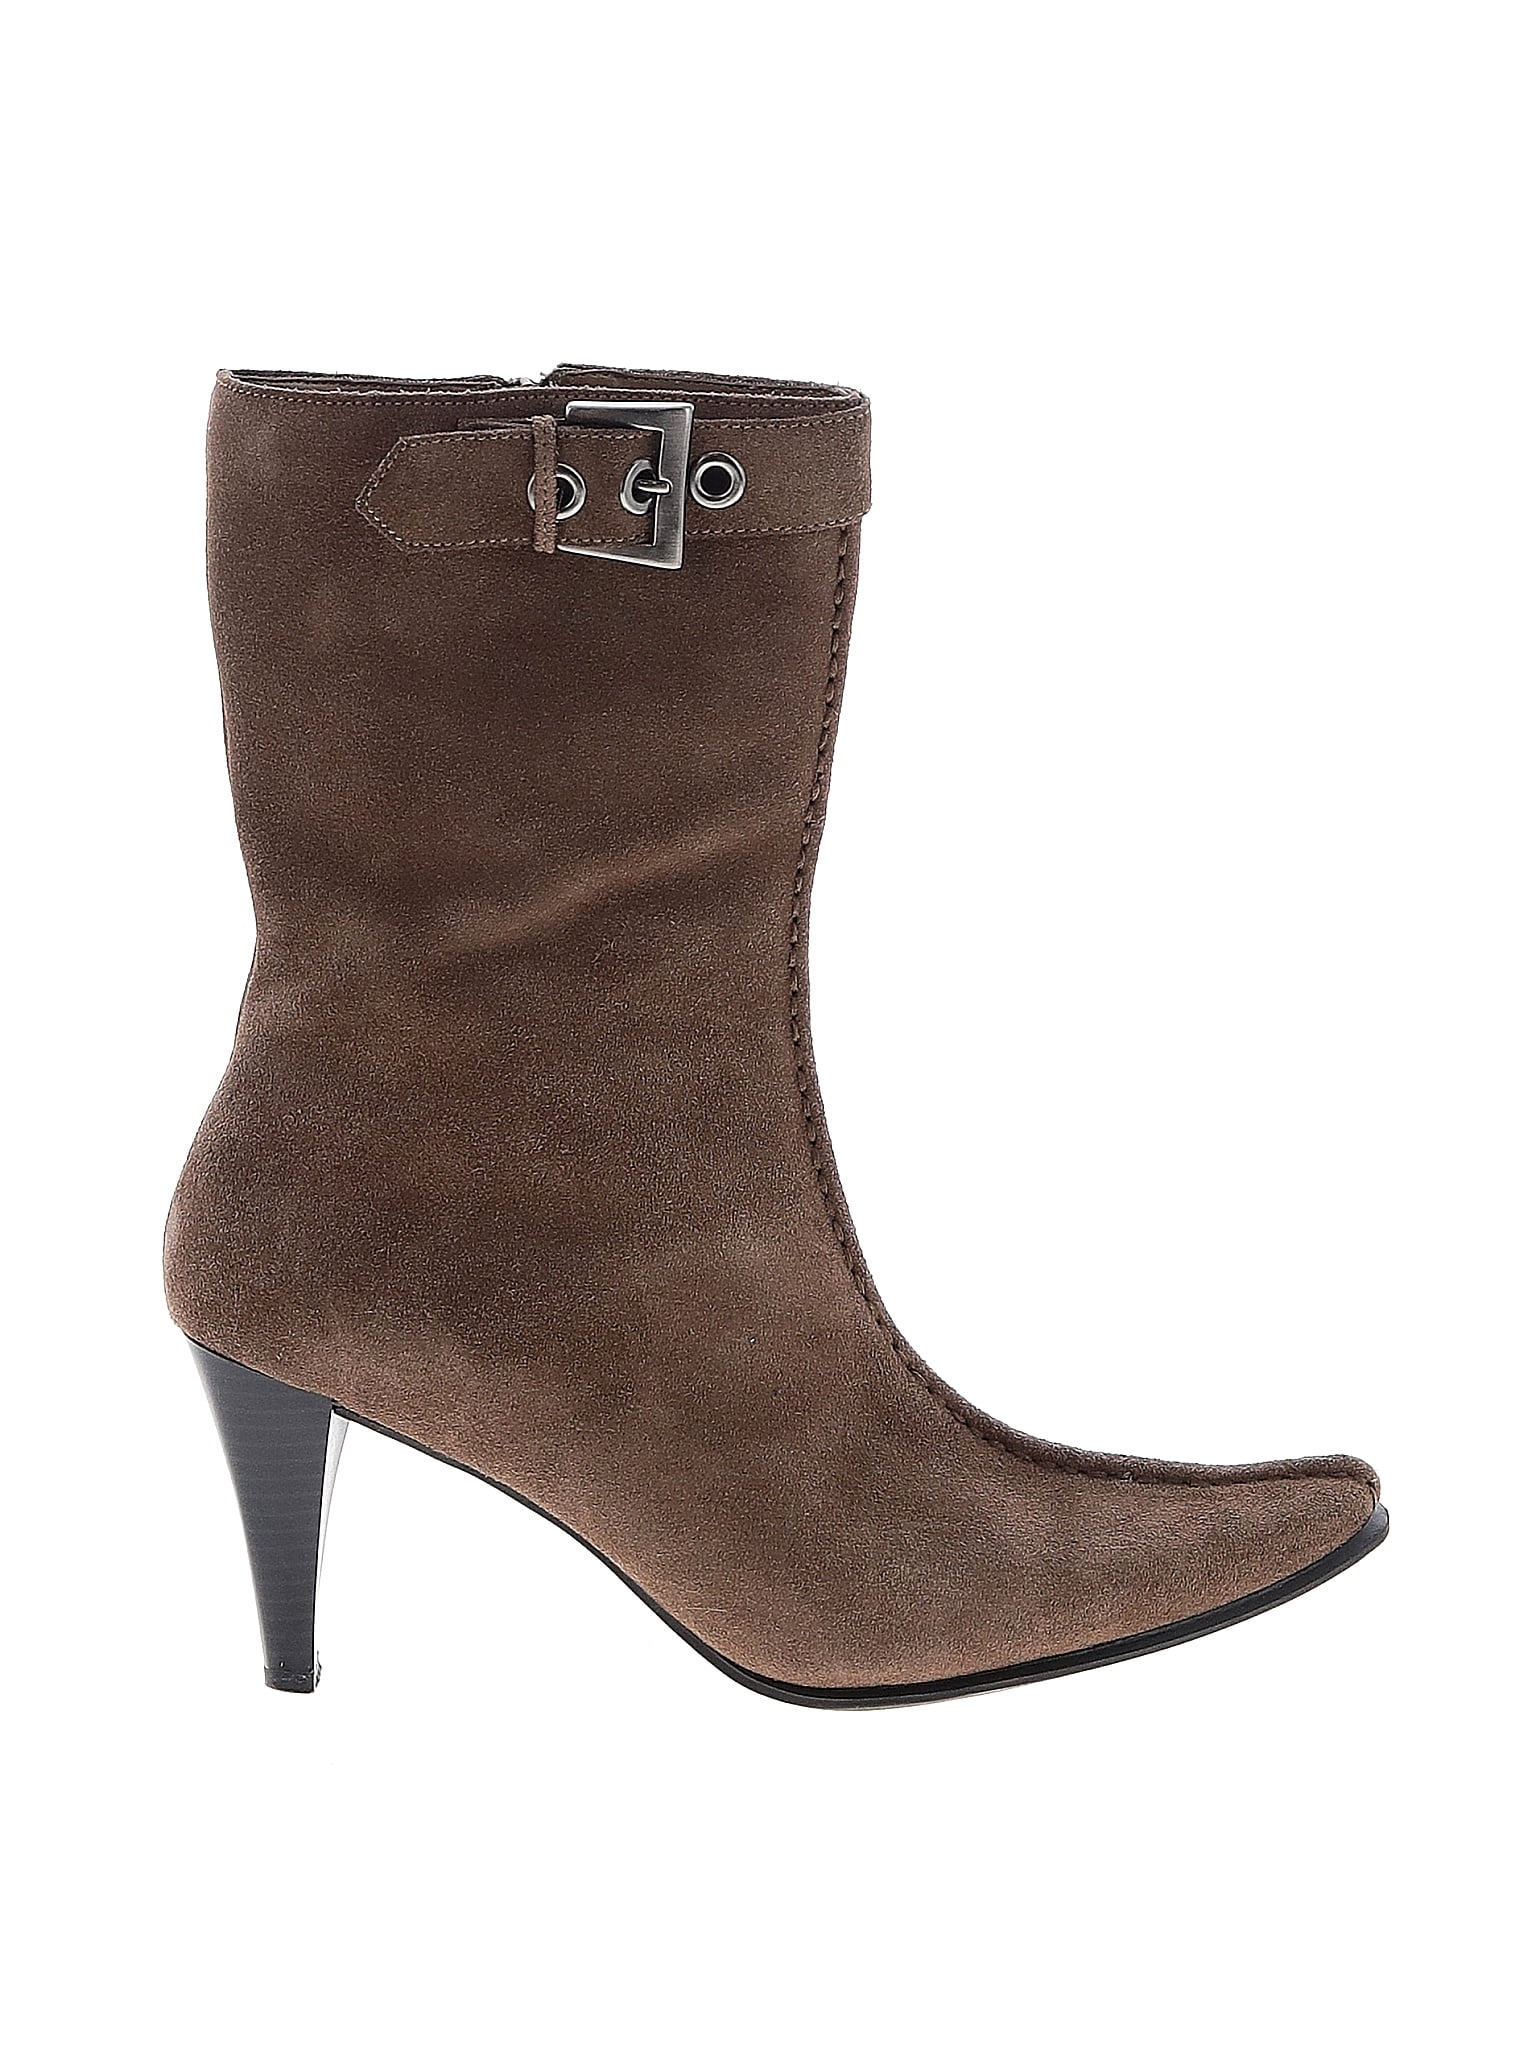 Mossimo Solid Brown Ankle Boots Size 8 1/2 - 31% off